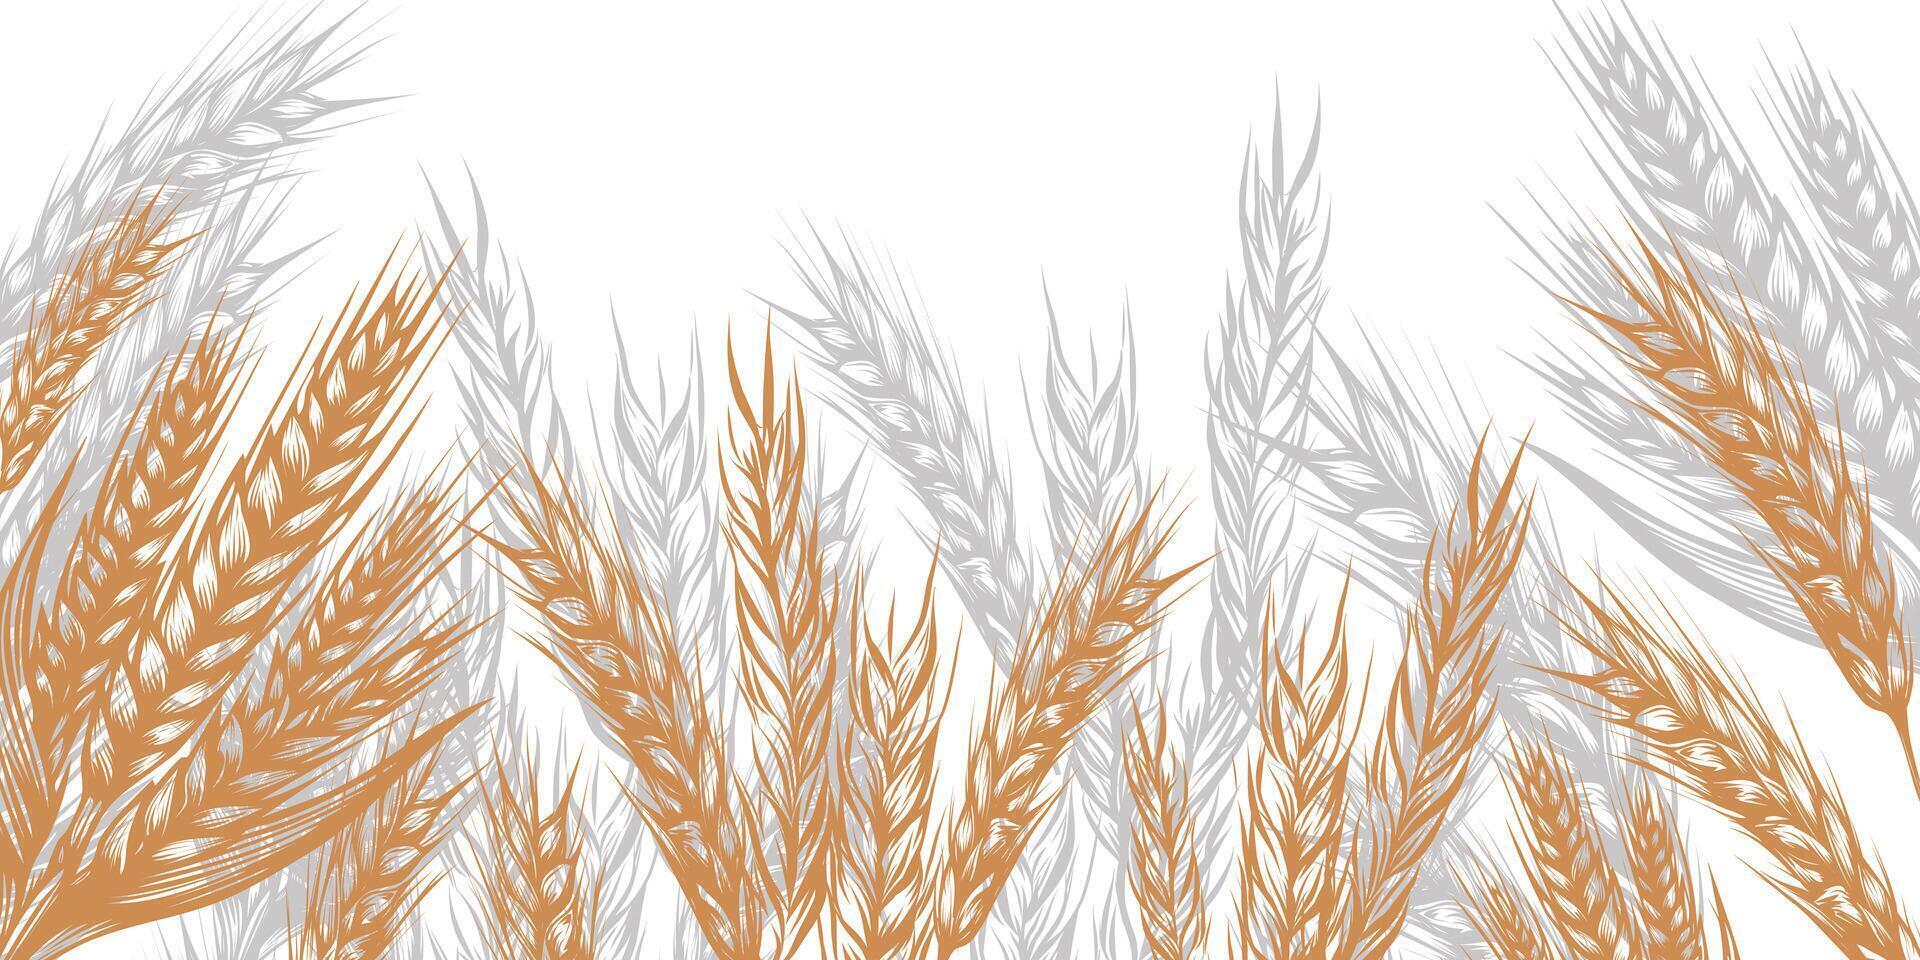 cereal border with spikelets of wheat in sketch vector illustration isolated on white. Ears of rye, barley, oats, millet for decoration, packaging and window design, bakery.